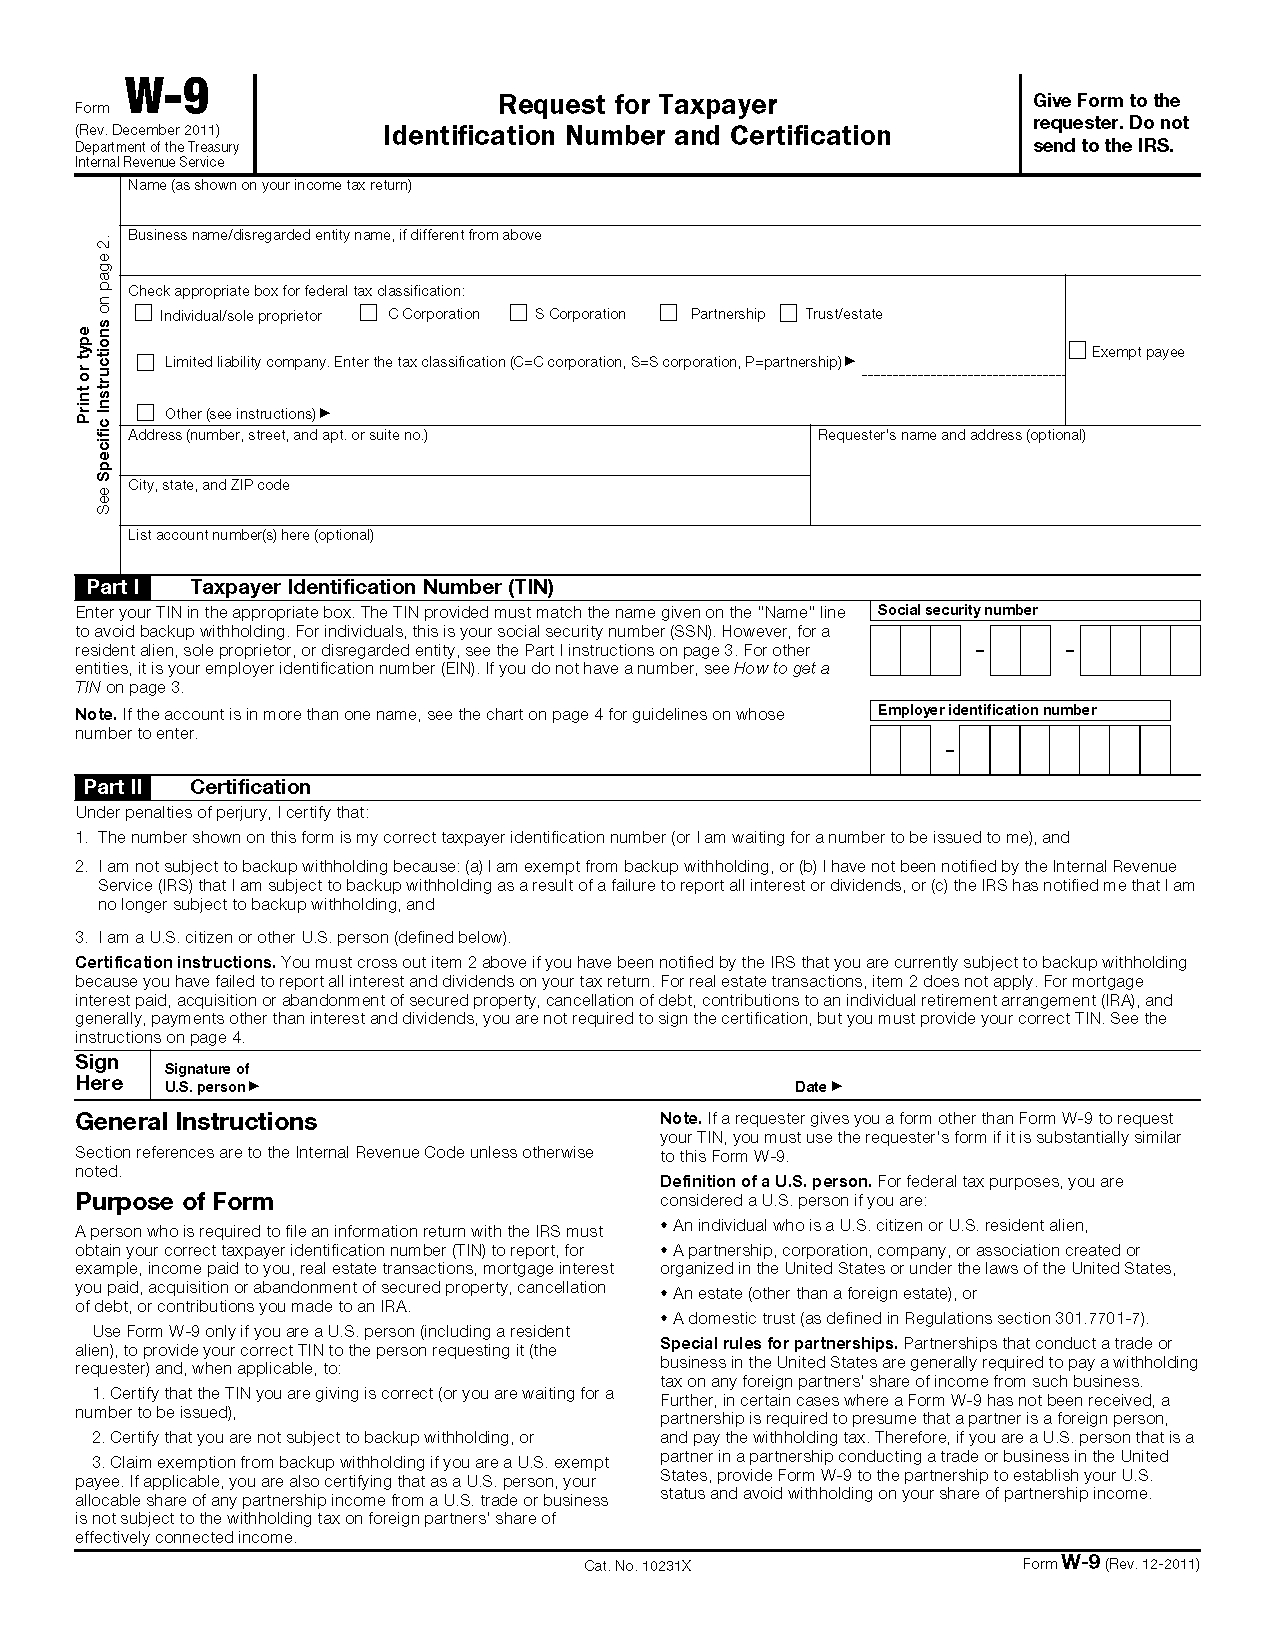 New W 9 Form Irs | Resume Maker: Create Professional Resumes